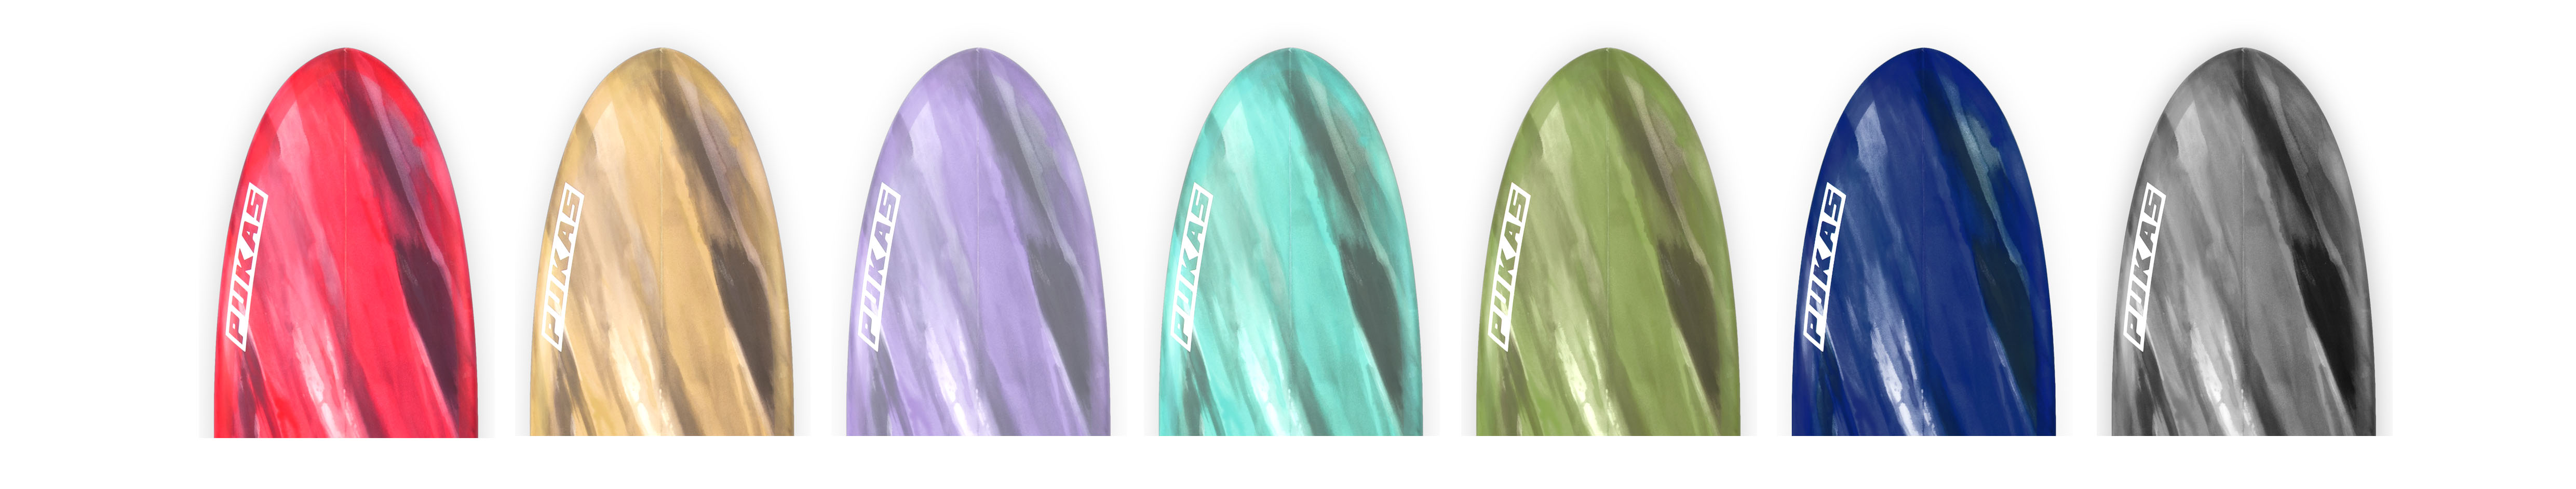 Pukas Surf Surfboards Resin Cake shaped by Axel Lorentz Urban Camo family